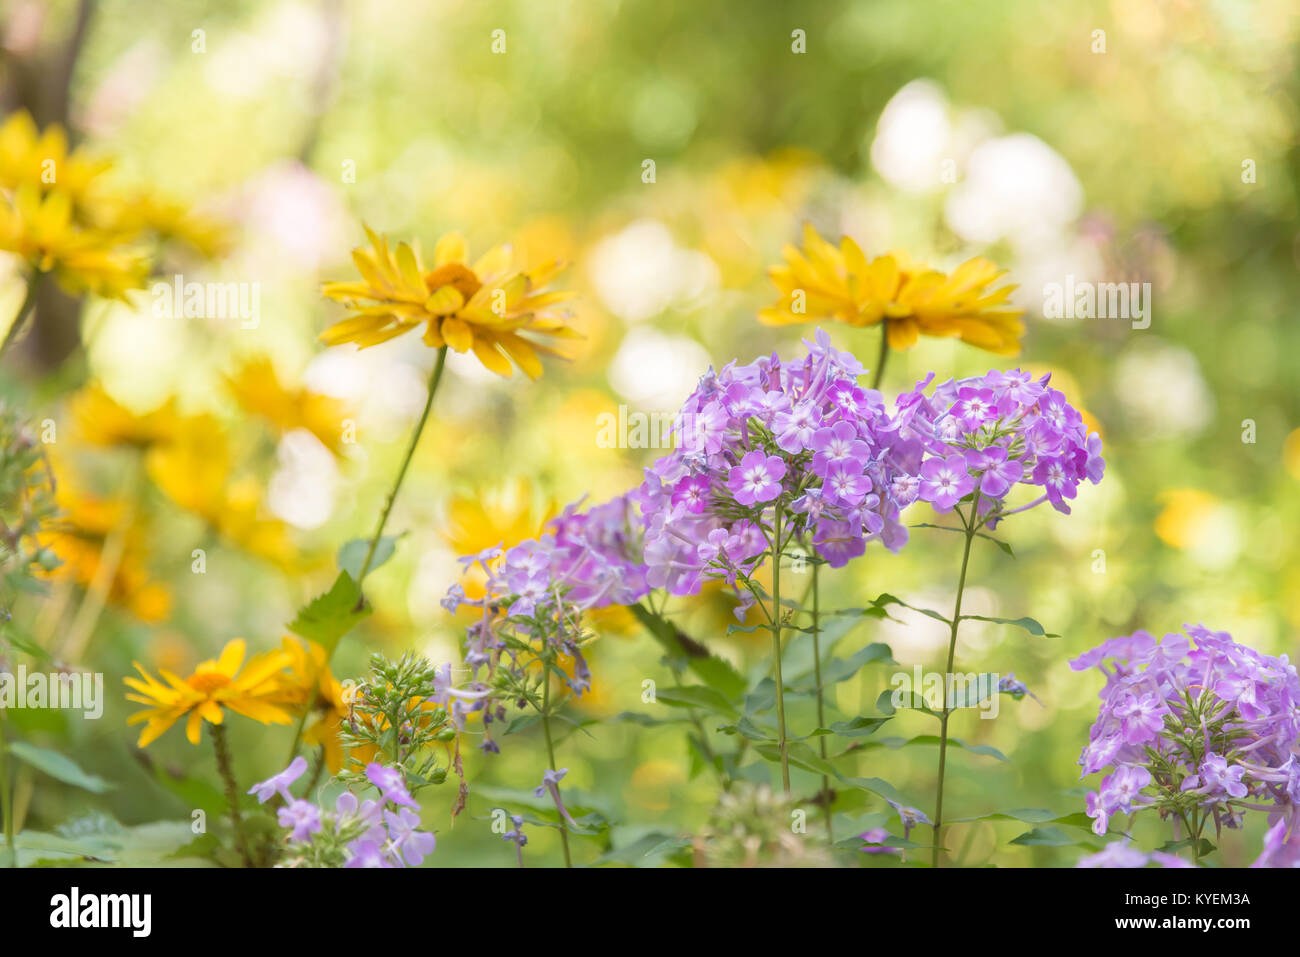 Close-up of purple phlox and yellow cone flowers blooming in a sunny summer garden Stock Photo